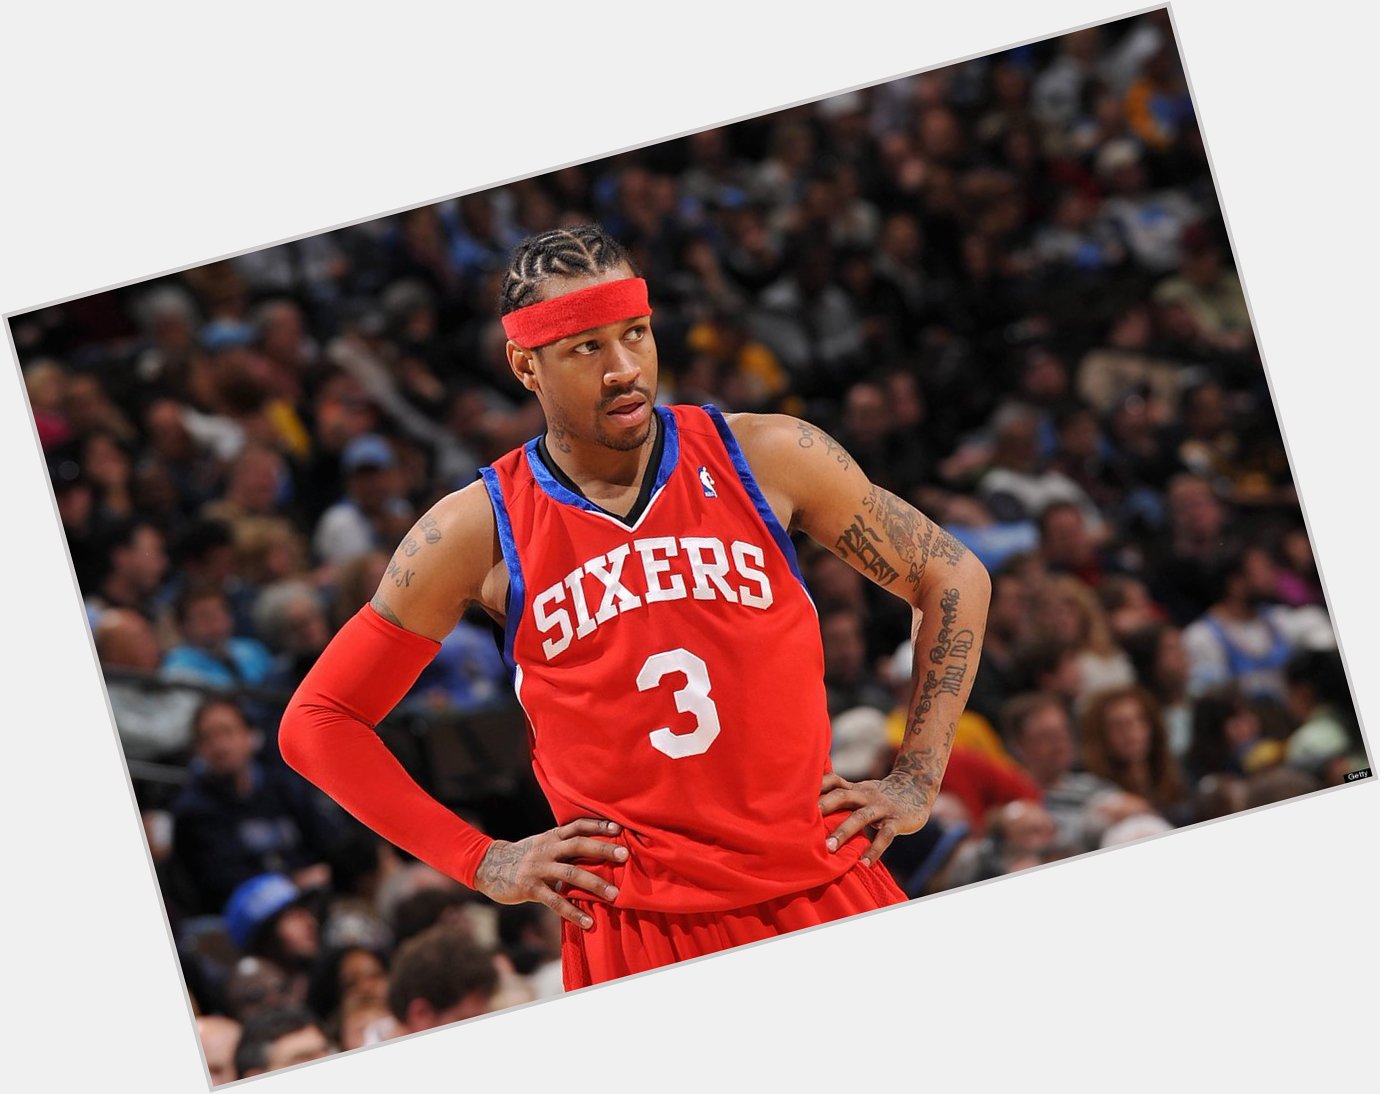 Happy Birthday to Allen Iverson who turns 42 today! 